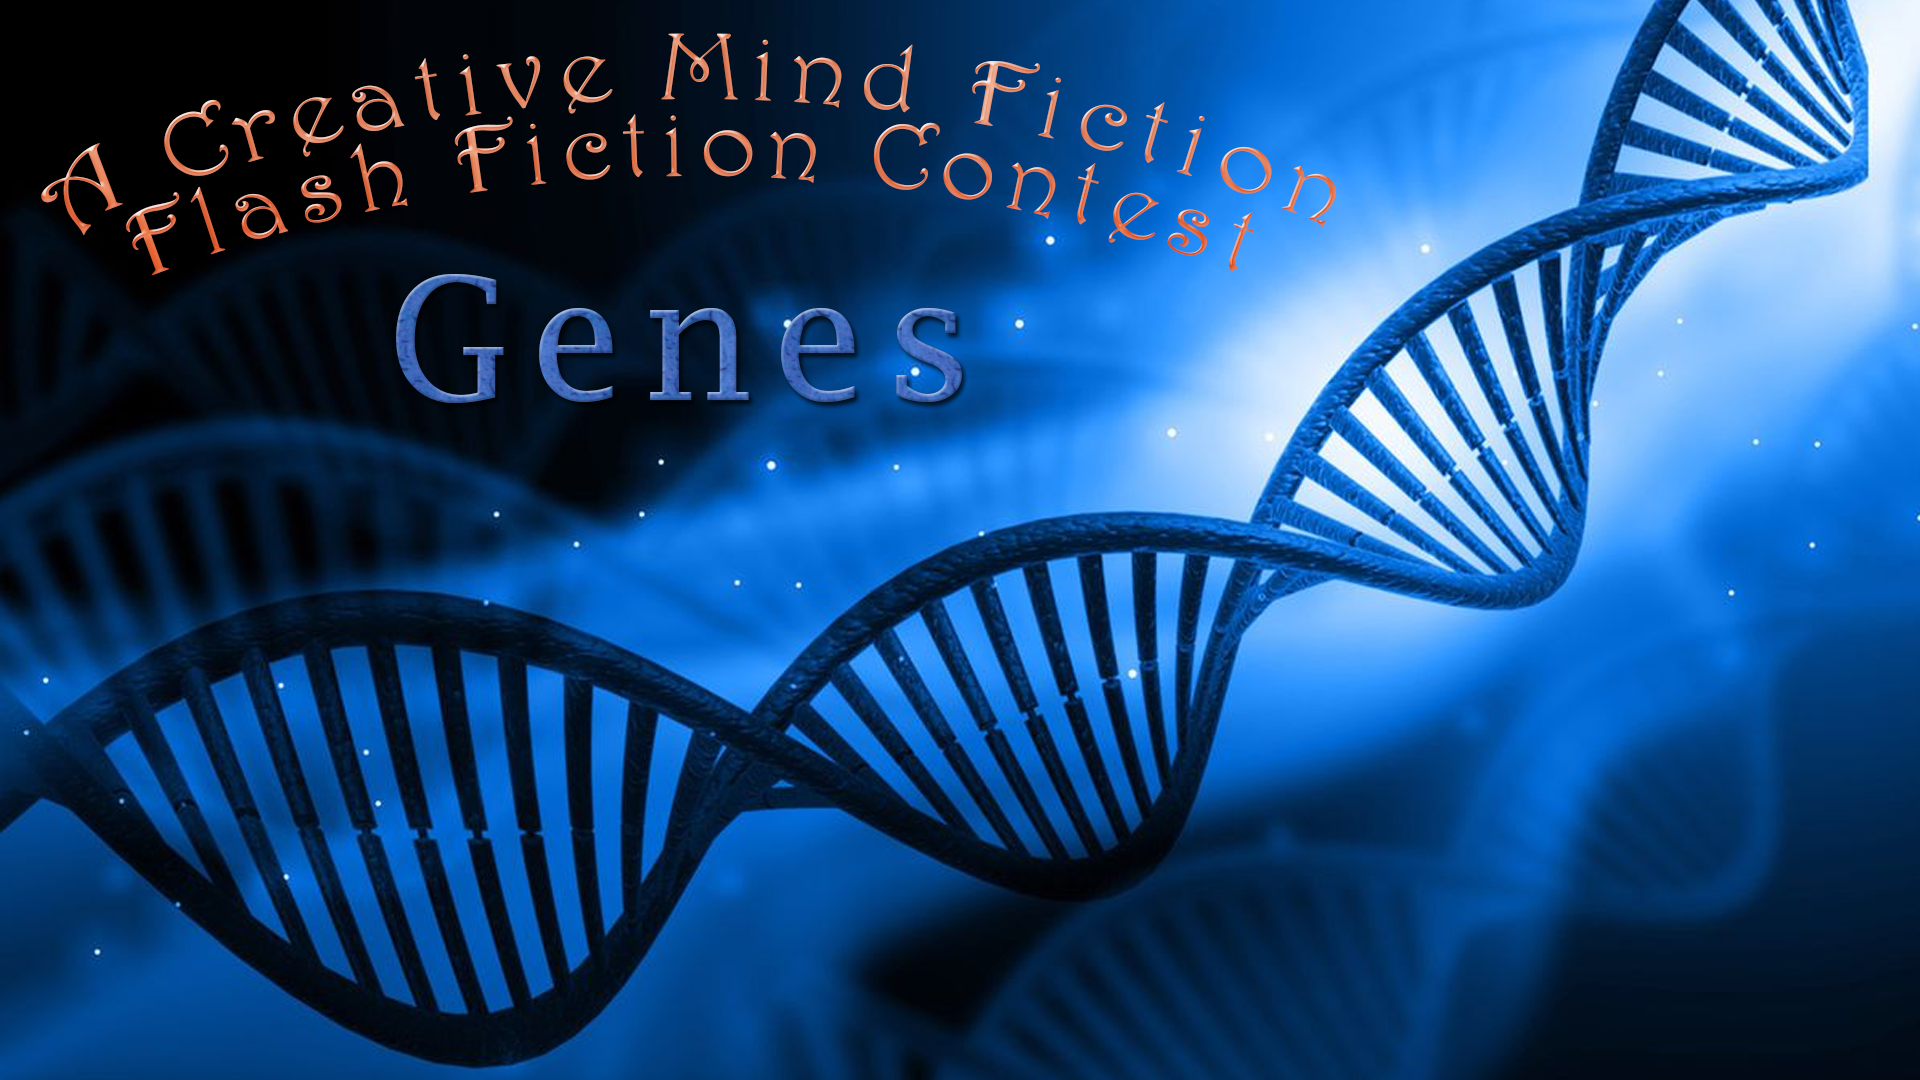 July 25 - August 7, 2019 Writing Prompt "It’s all in the genes"